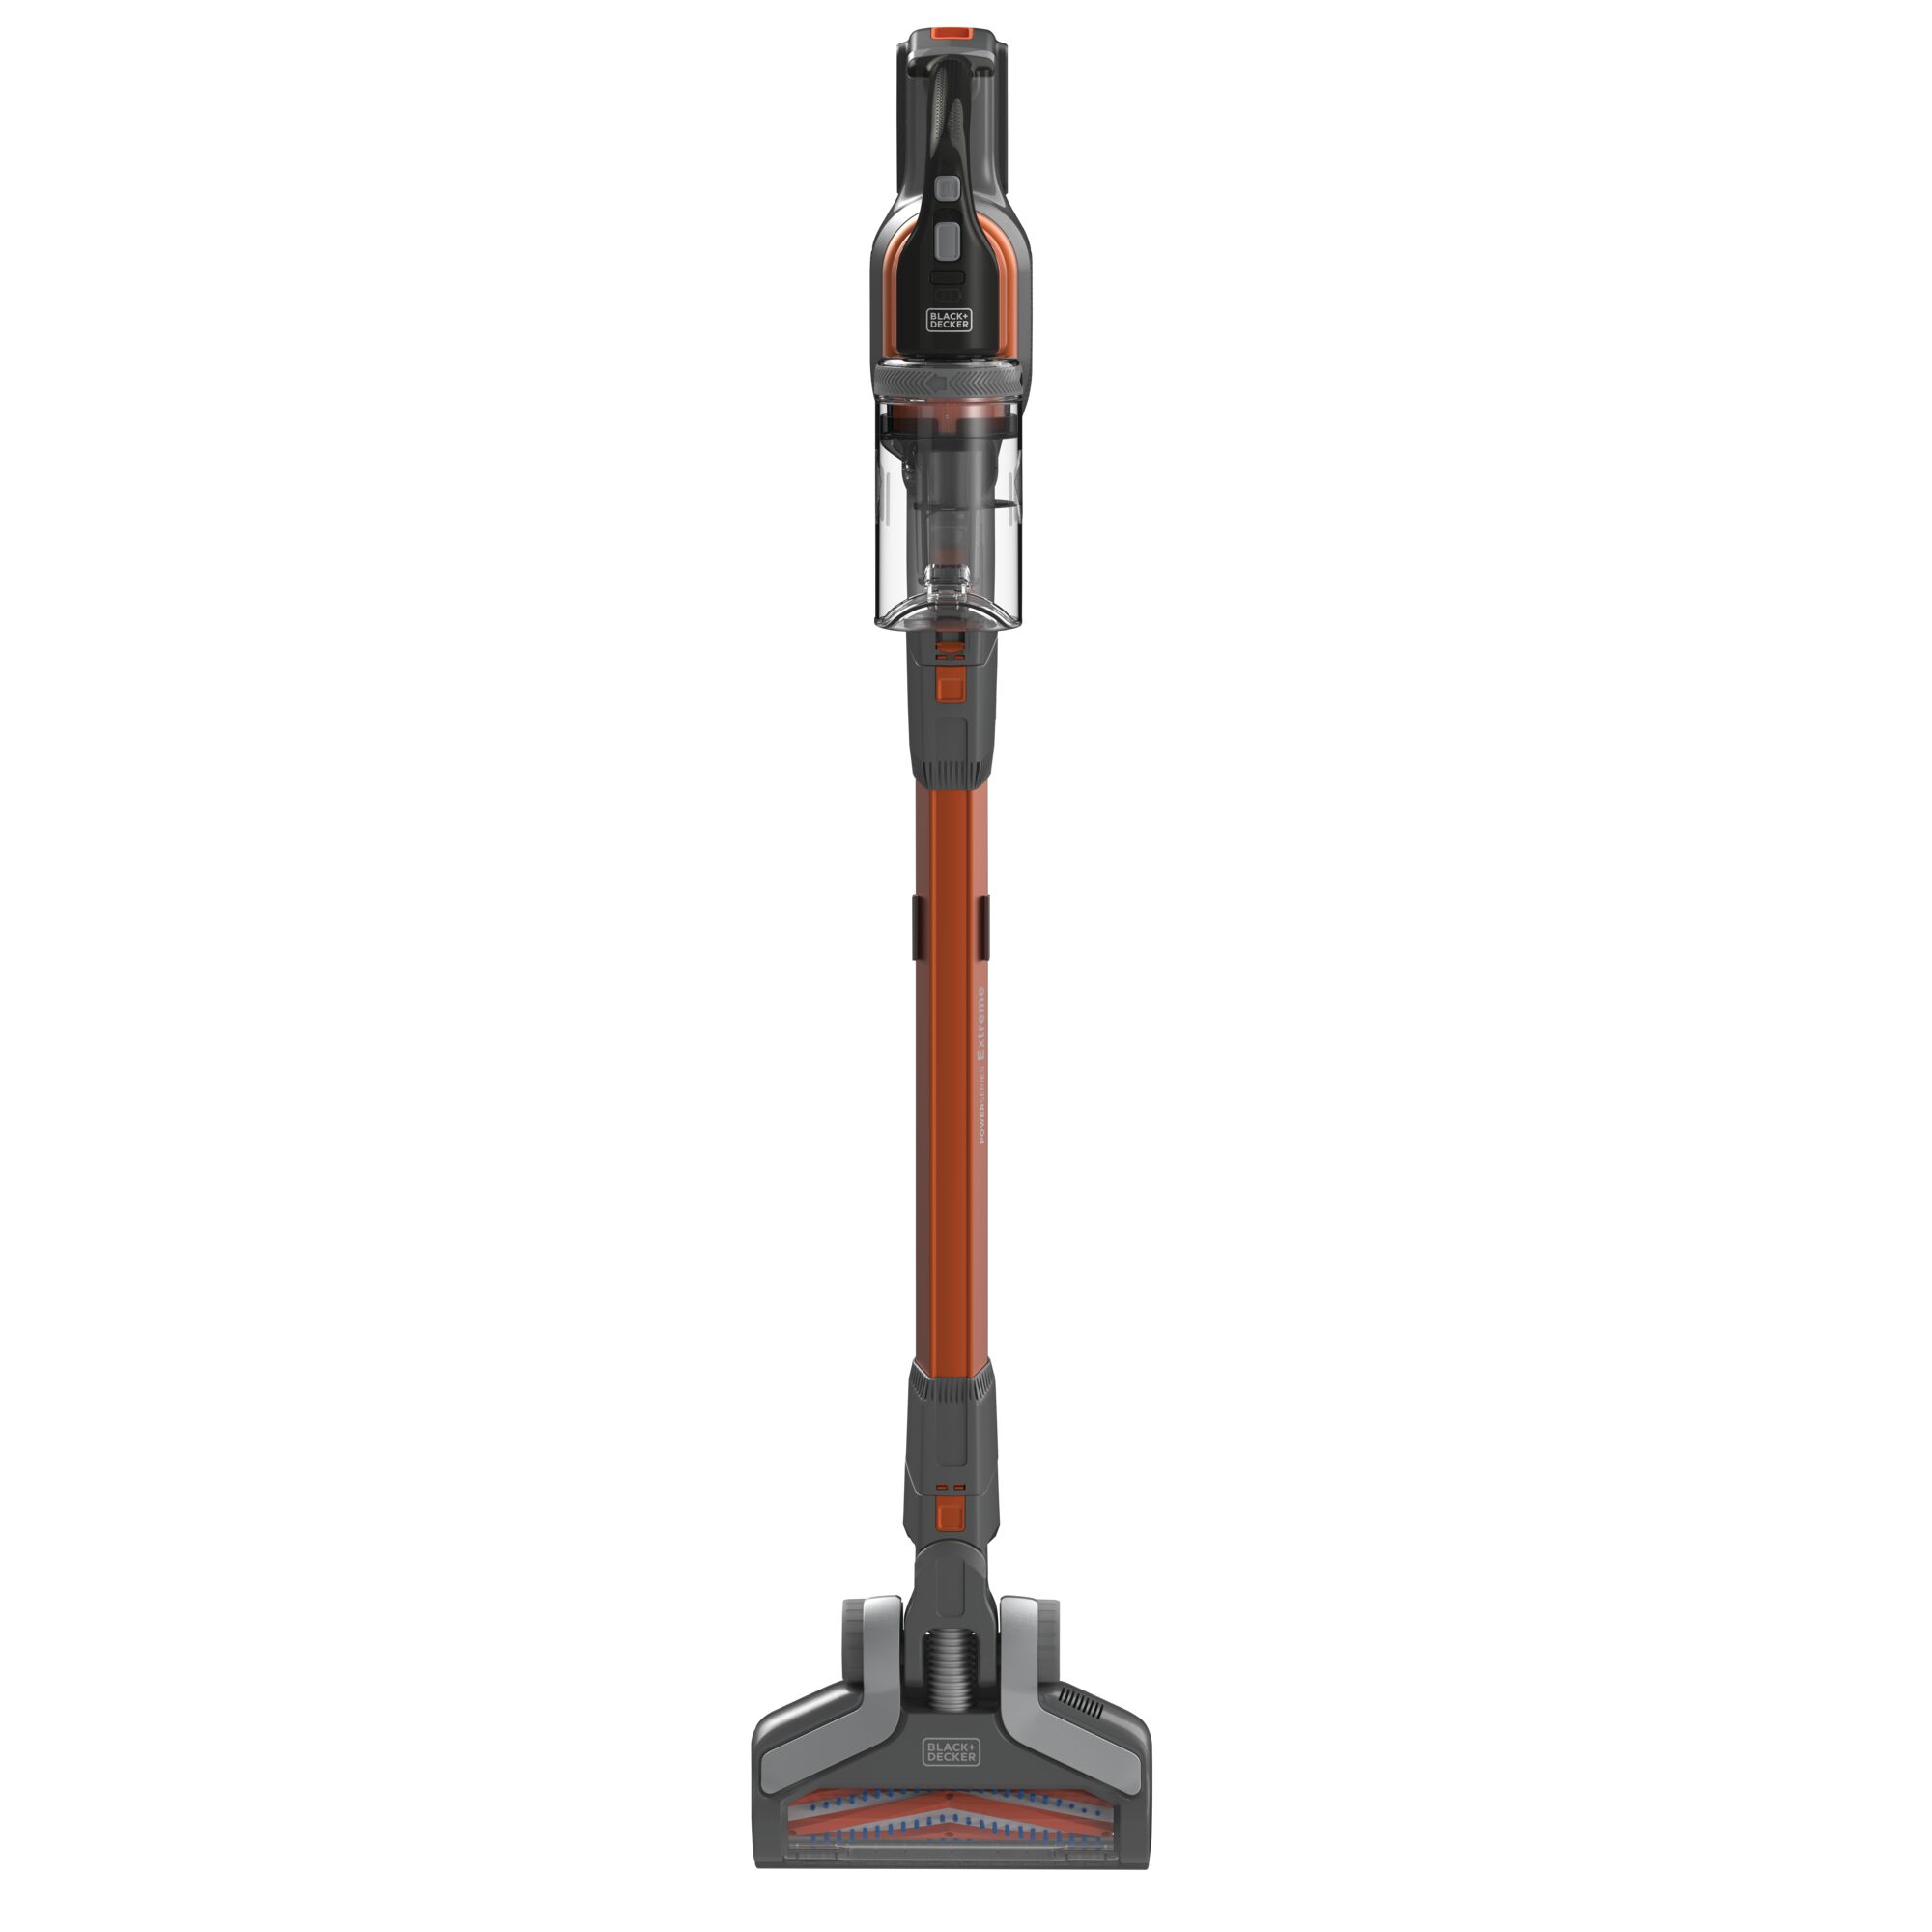 POWER SERIES Extreme Cordless Stick Vacuum Cleaner.